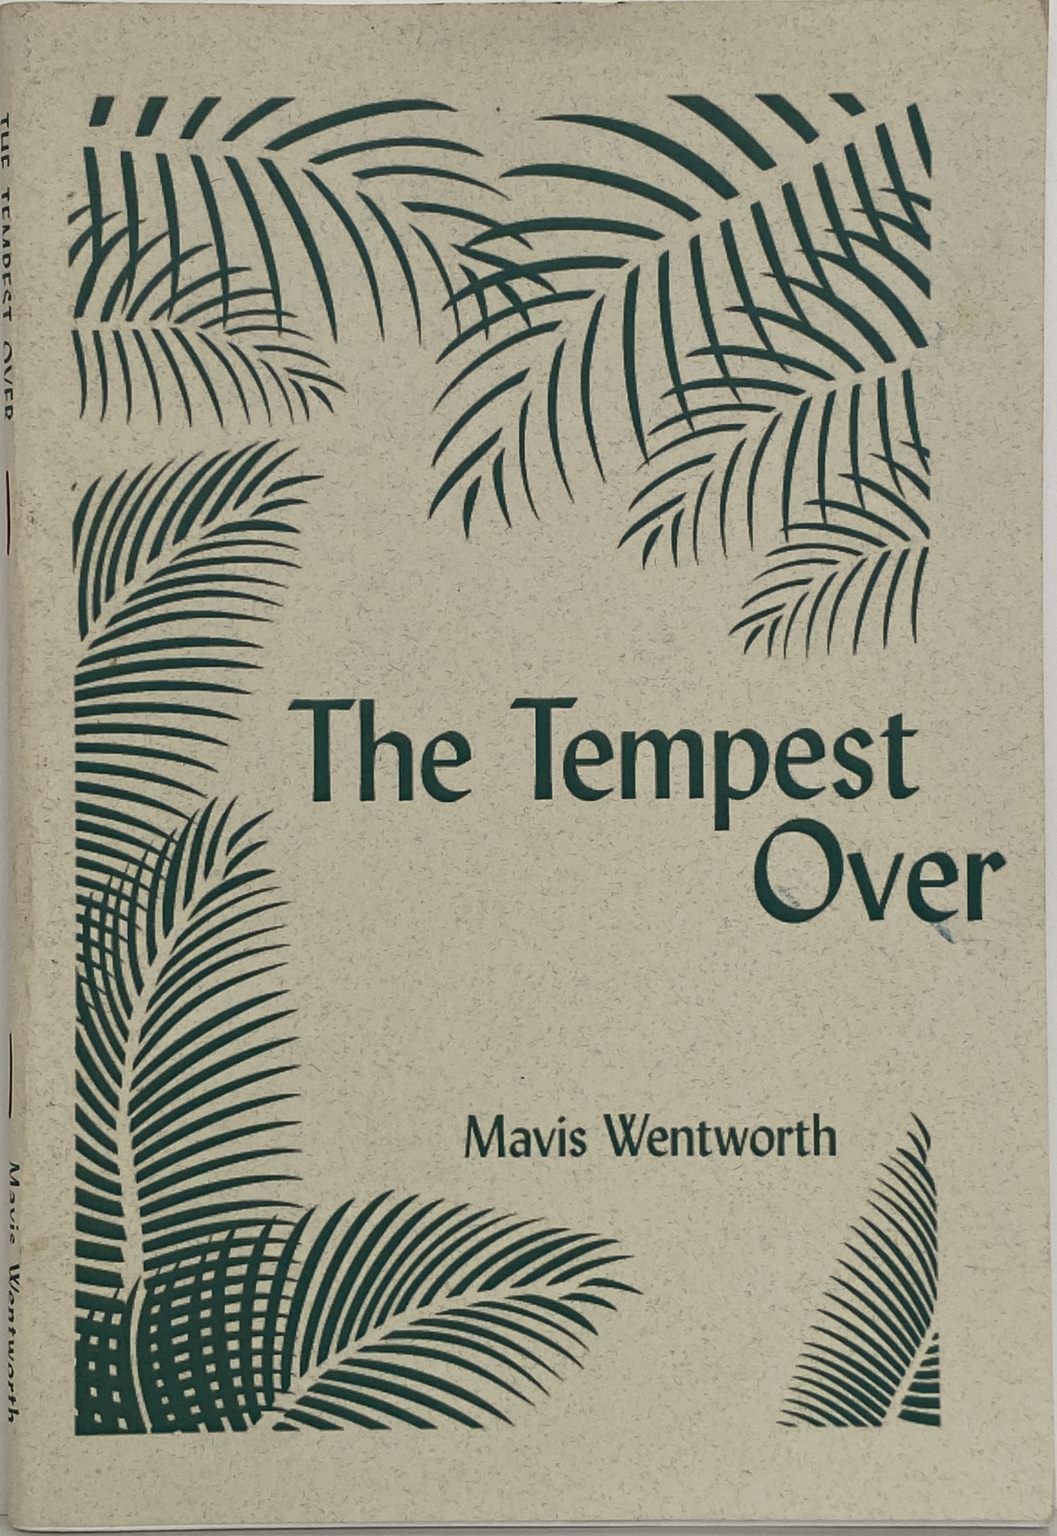 THE TEMPEST OVER